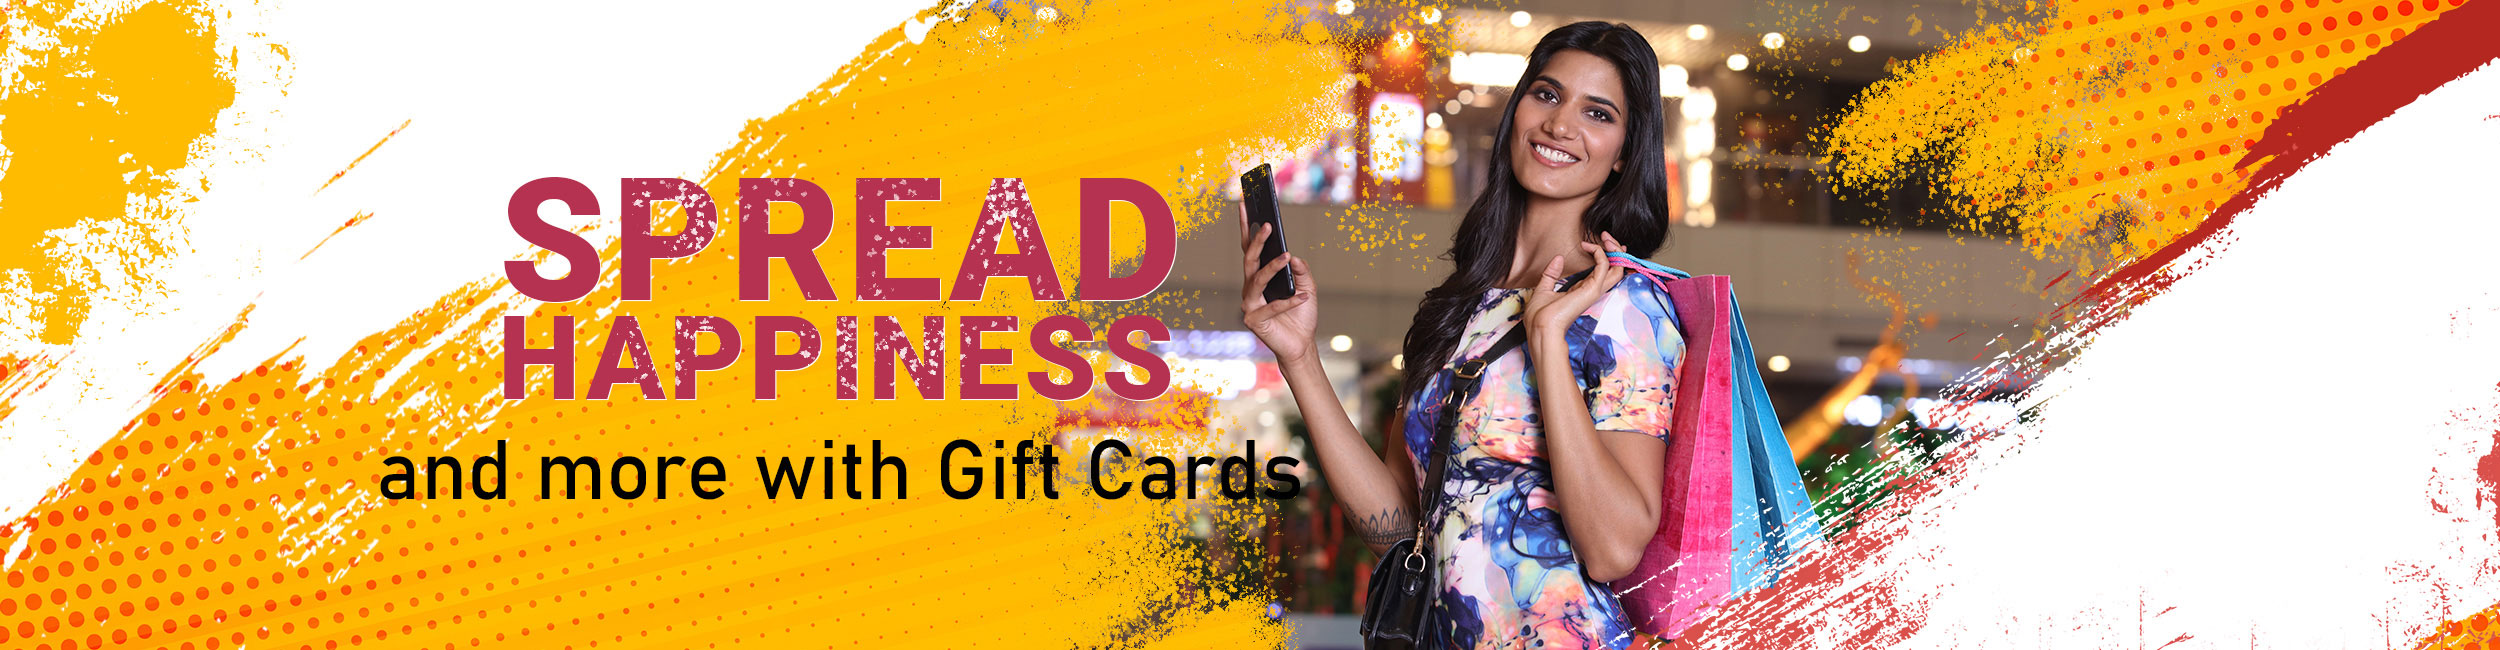 EbixCash Spread Happiness and more with gift cards